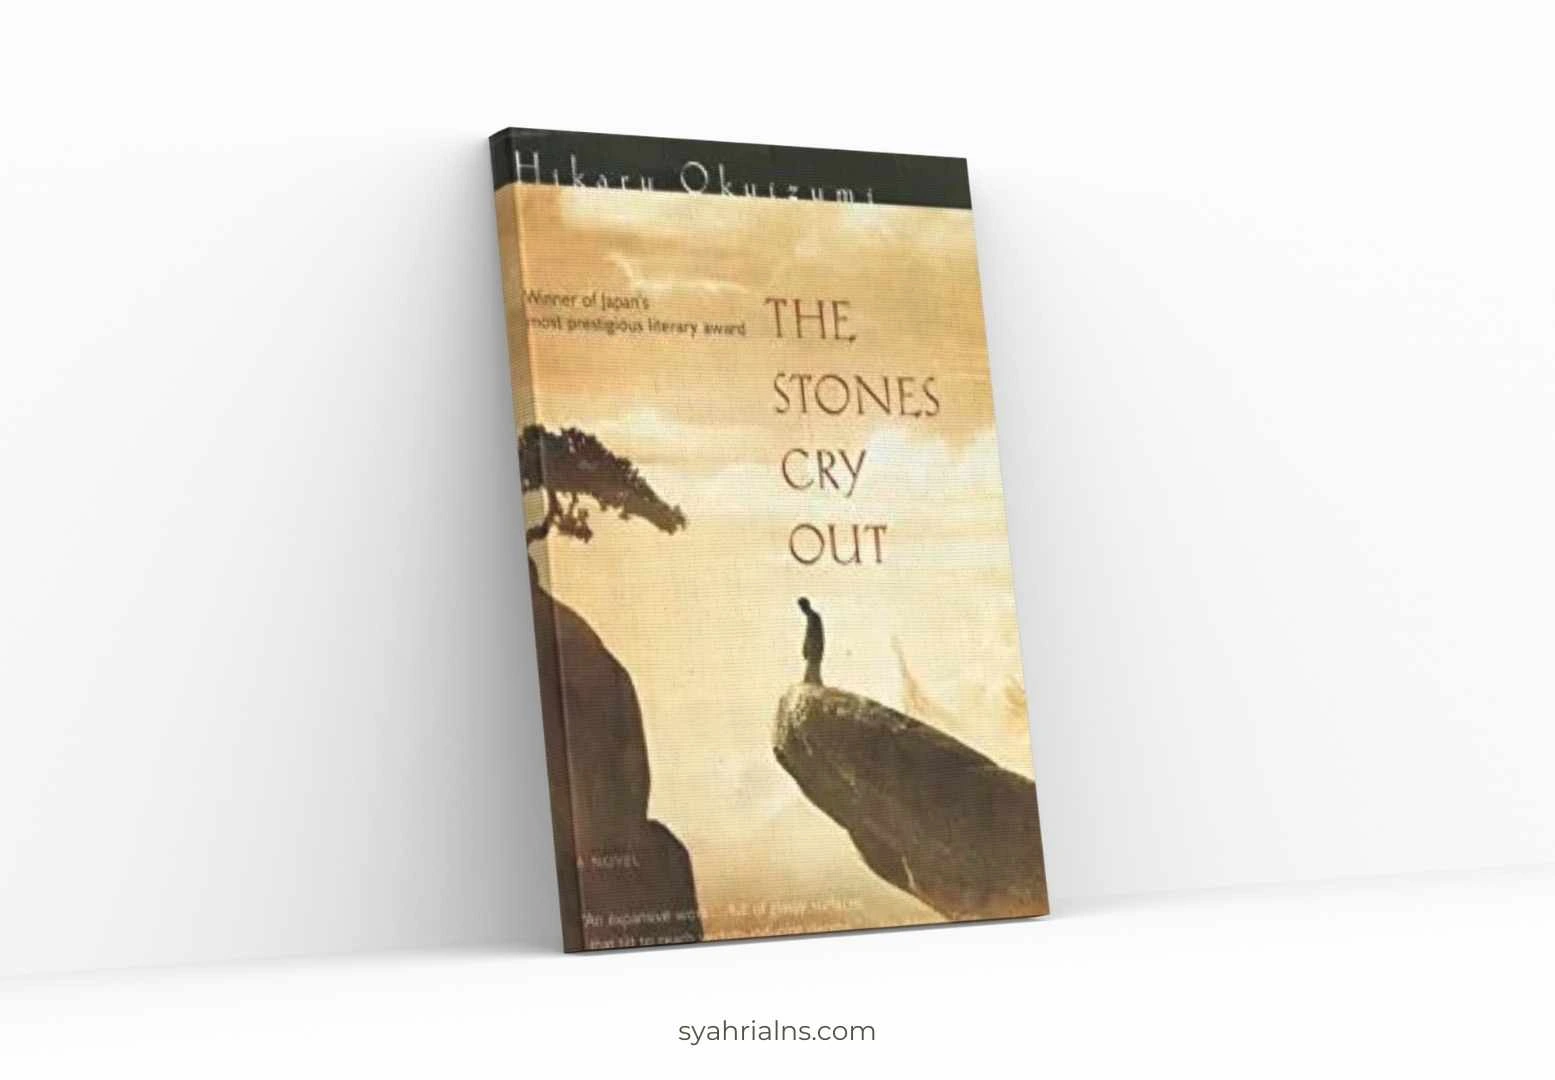 The Stones Cry Out by Hikaru Okuizumi